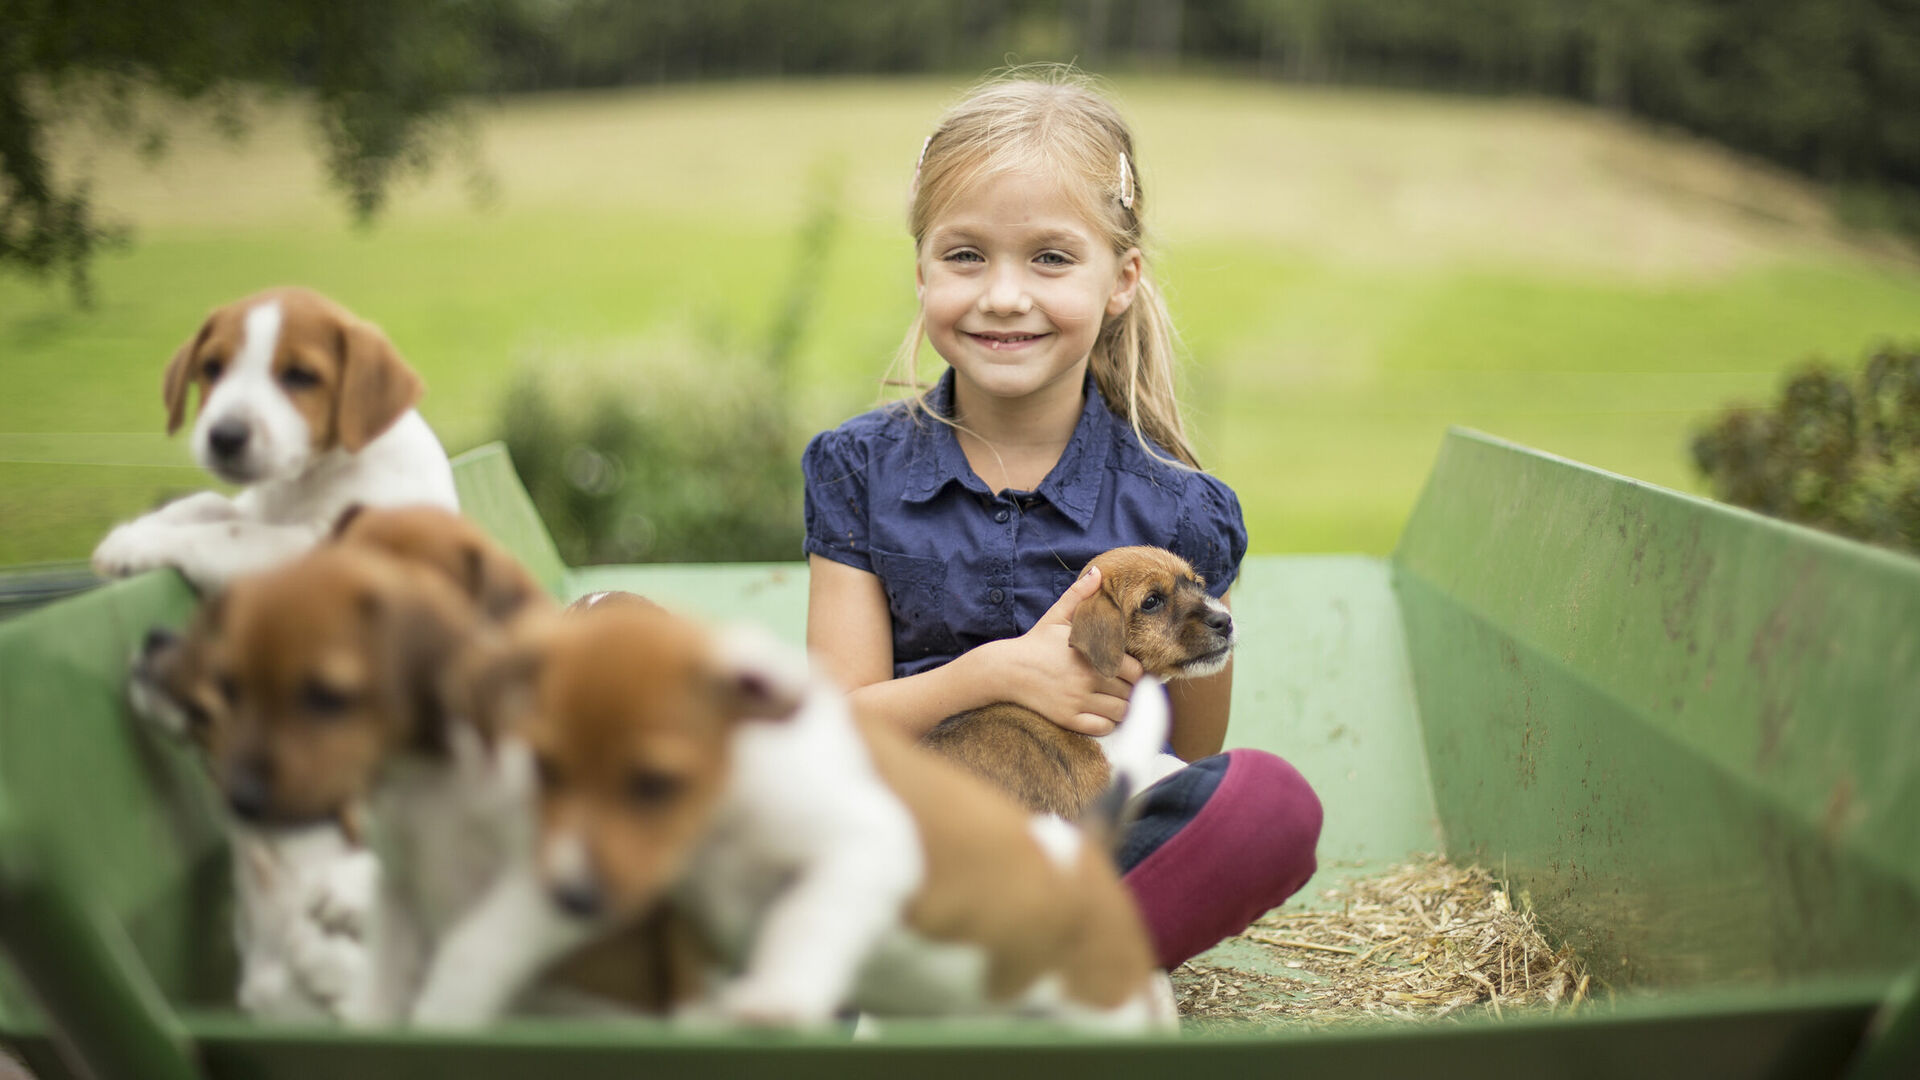 Child in a wheelbarrow with some puppies.